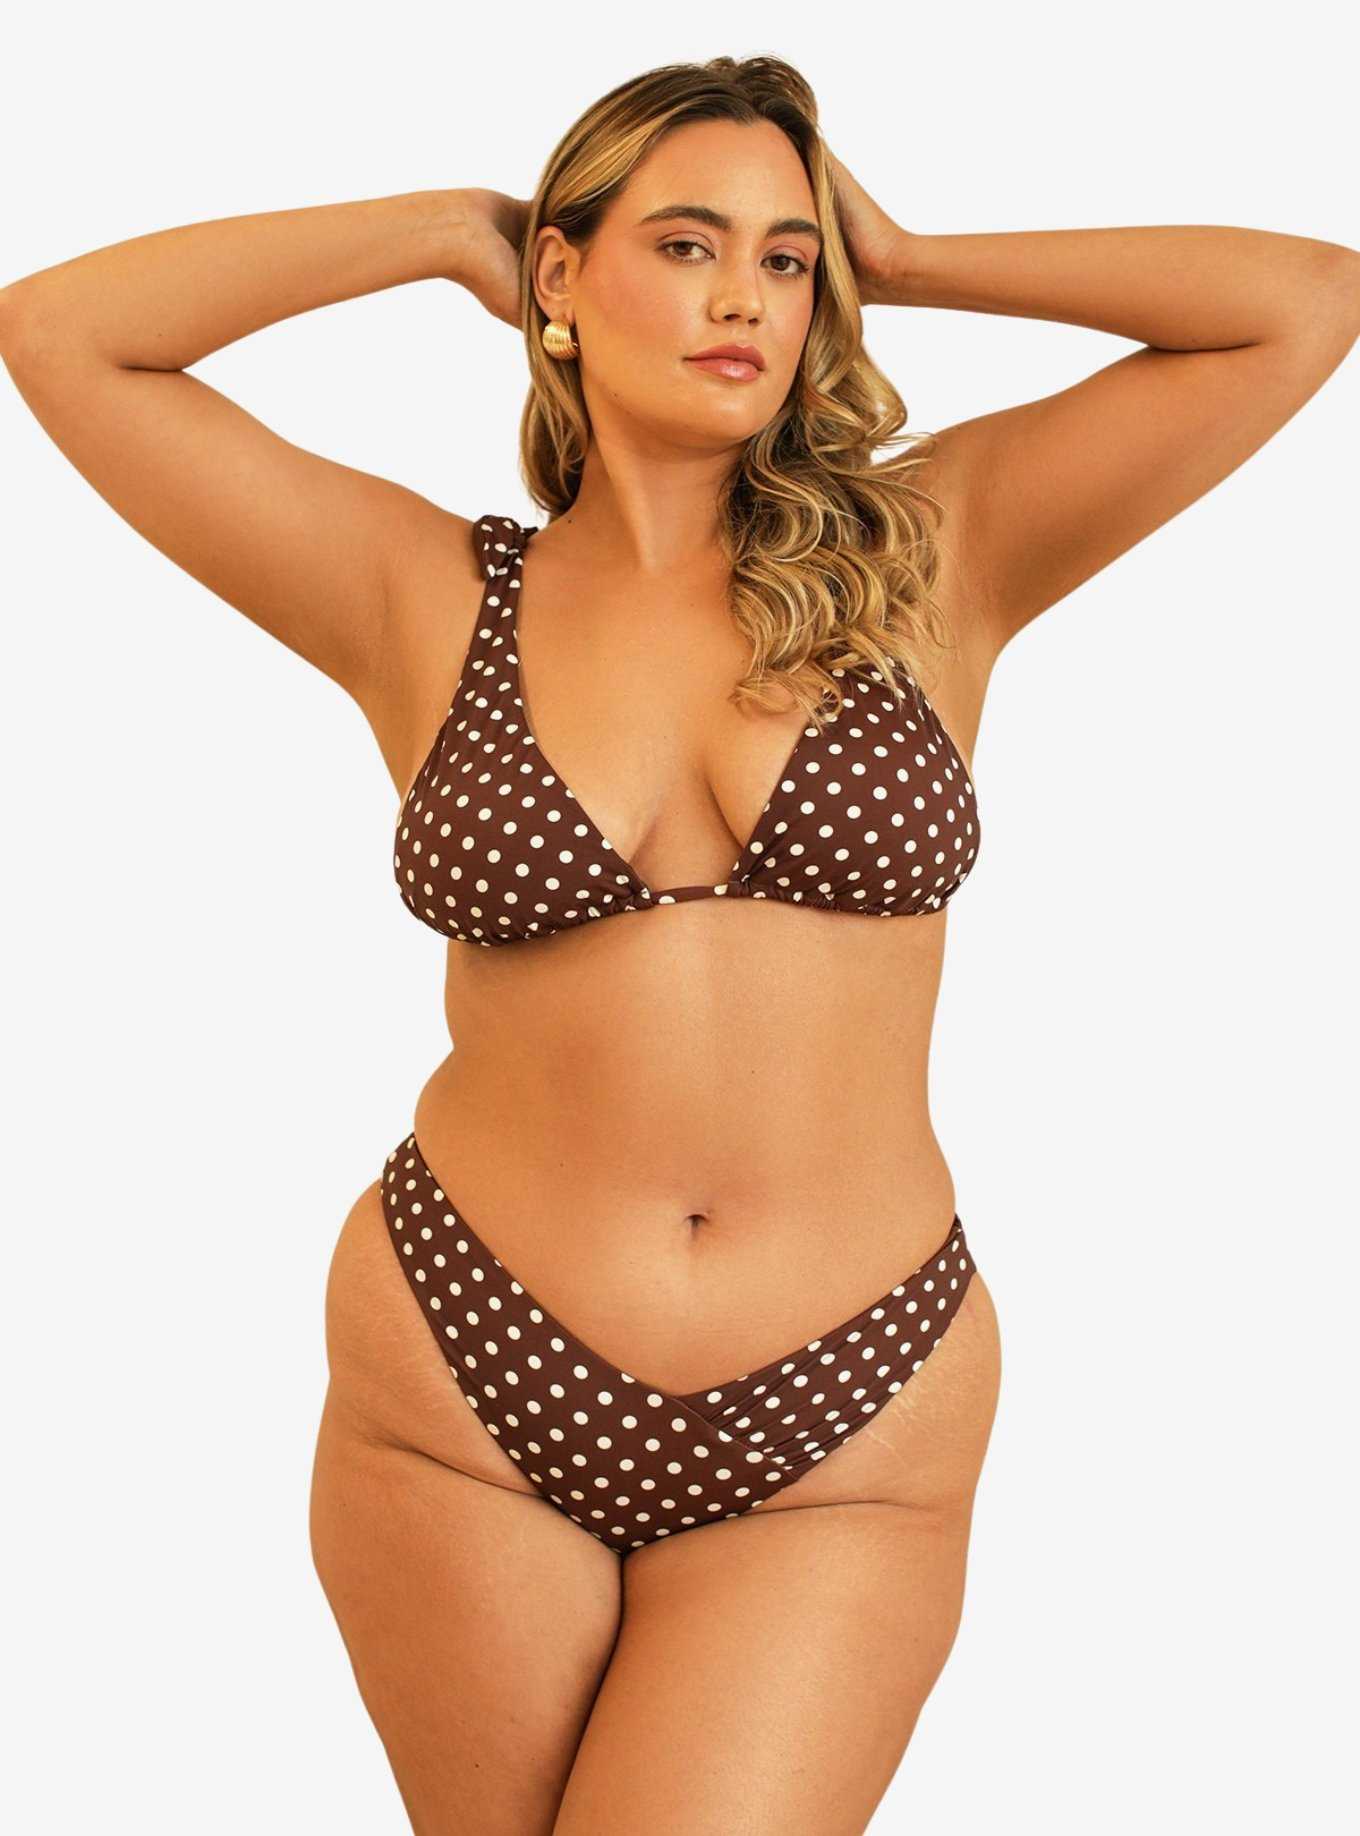 Dippin' Daisy's Angel Cheeky Swim Bottom Dotted Brown, , hi-res